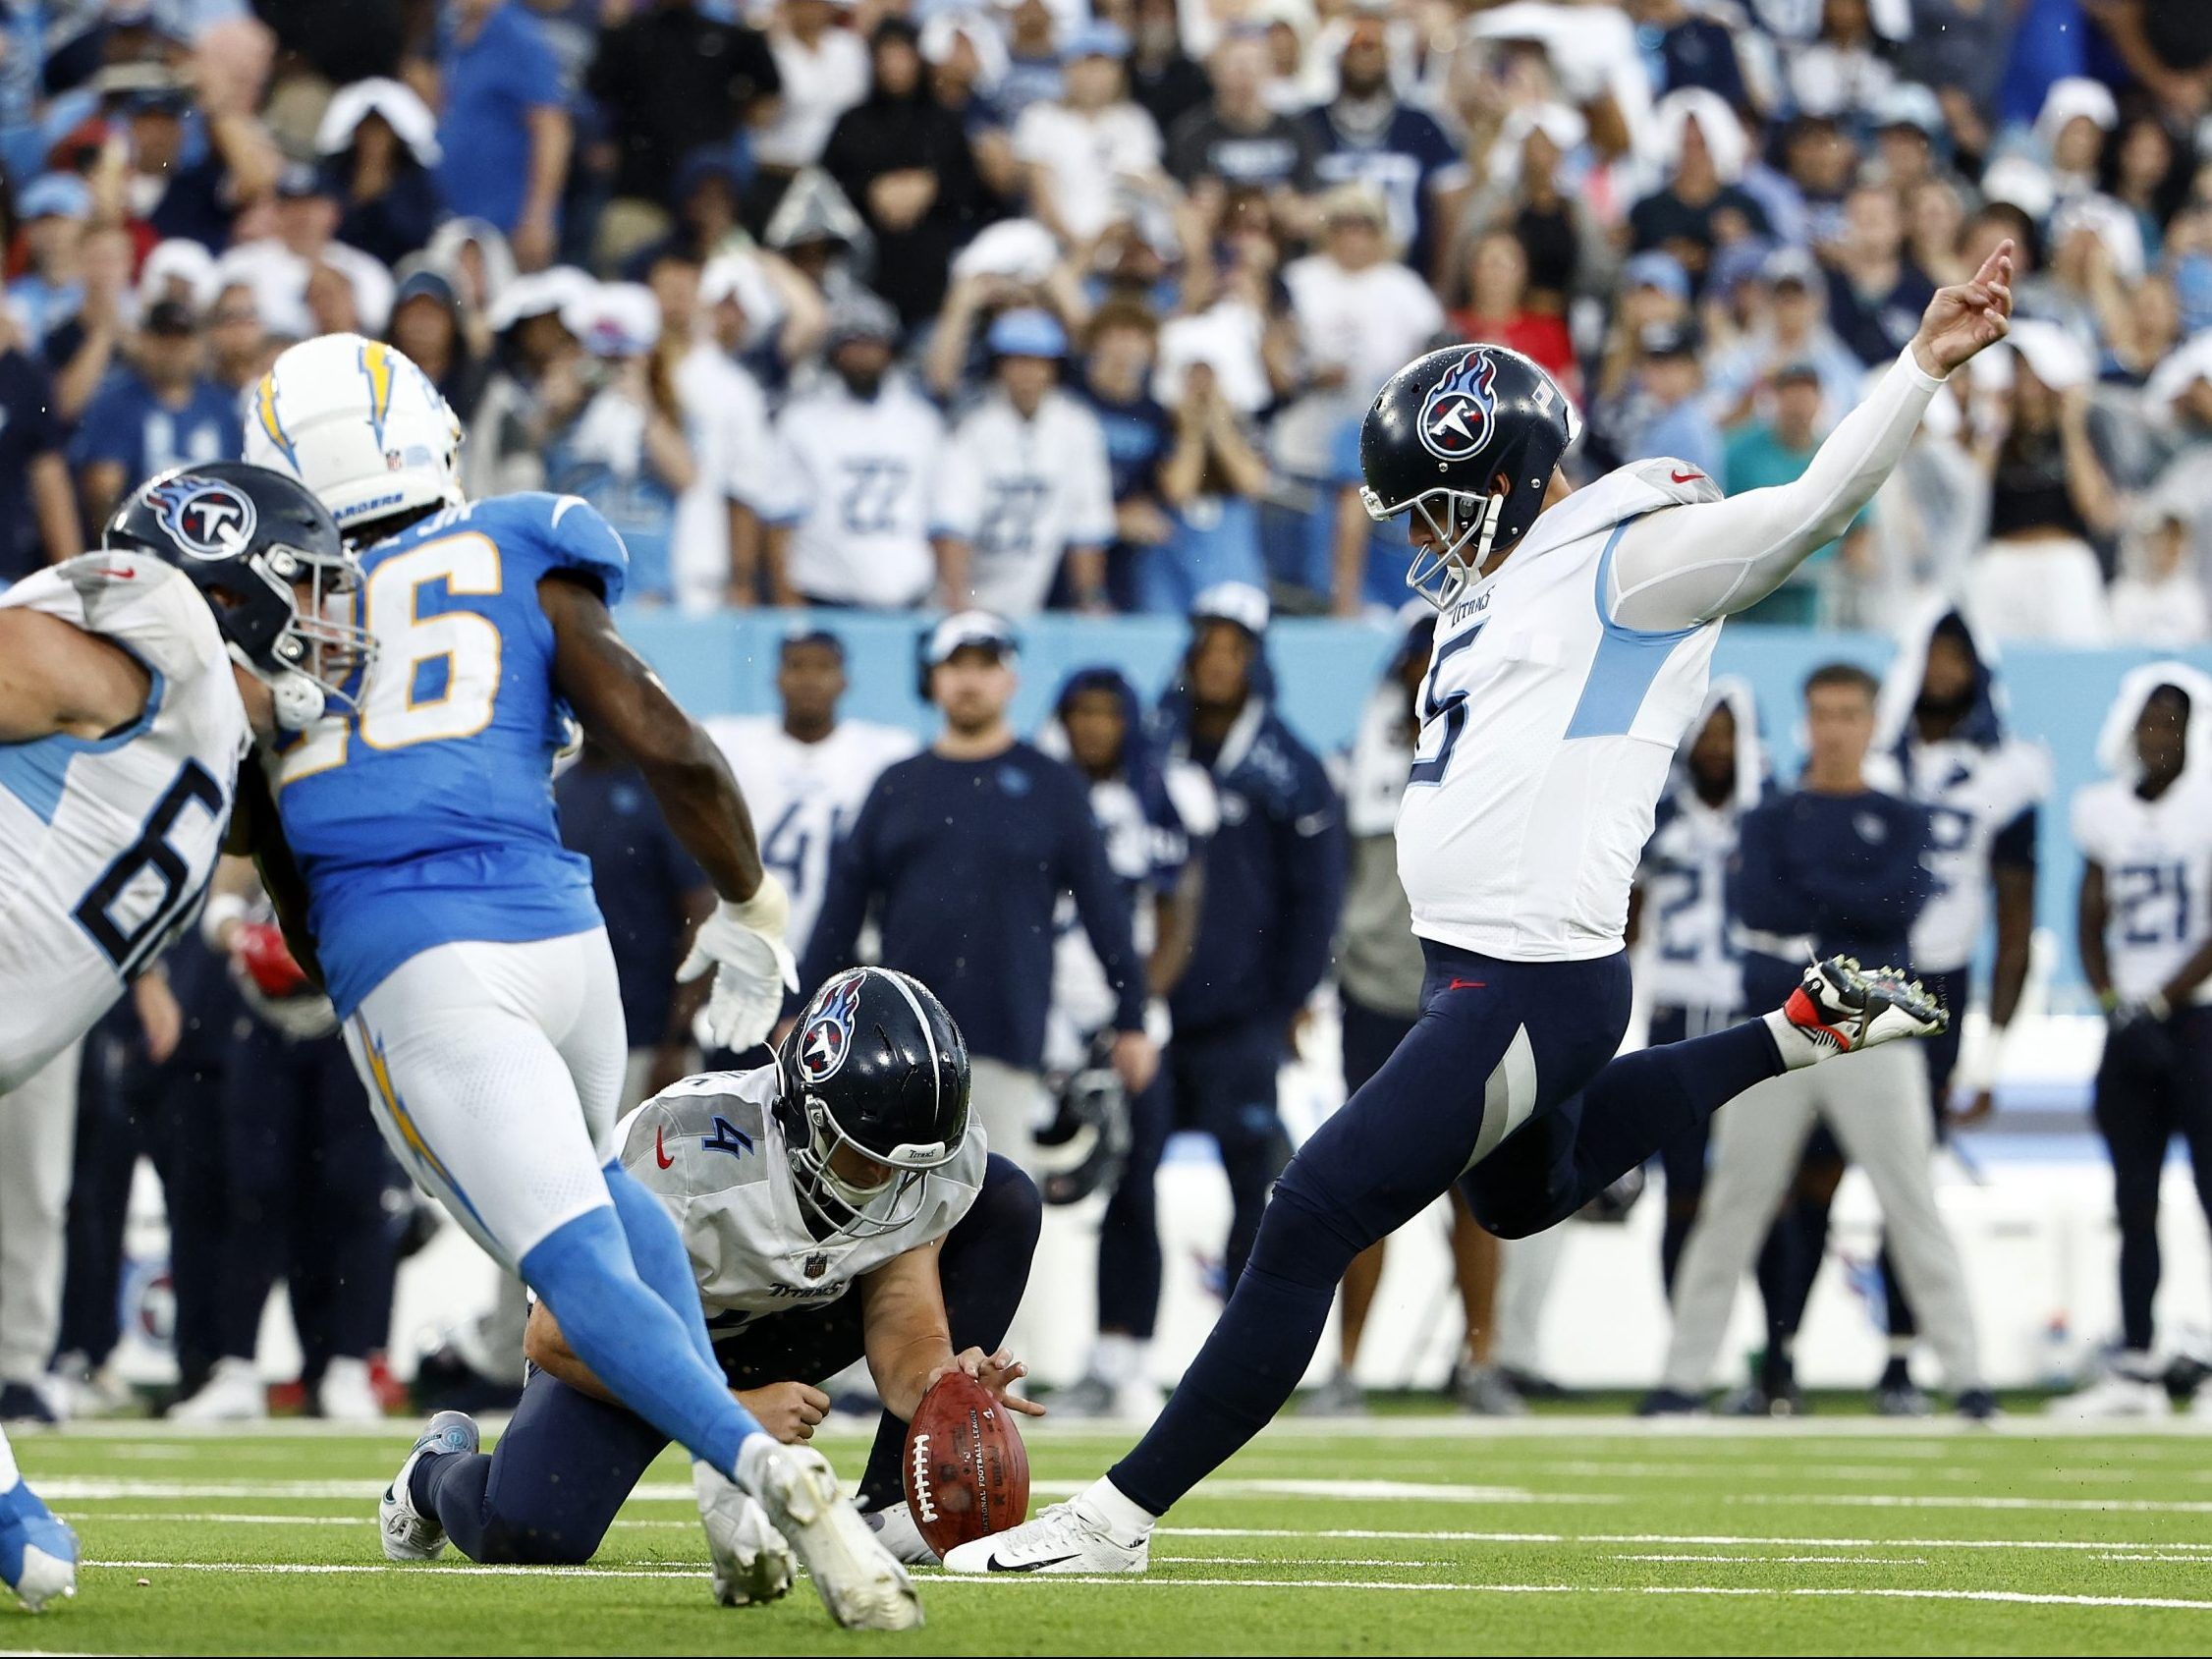 Chargers lose to Titans in overtime on Nick Folk field goal - Los